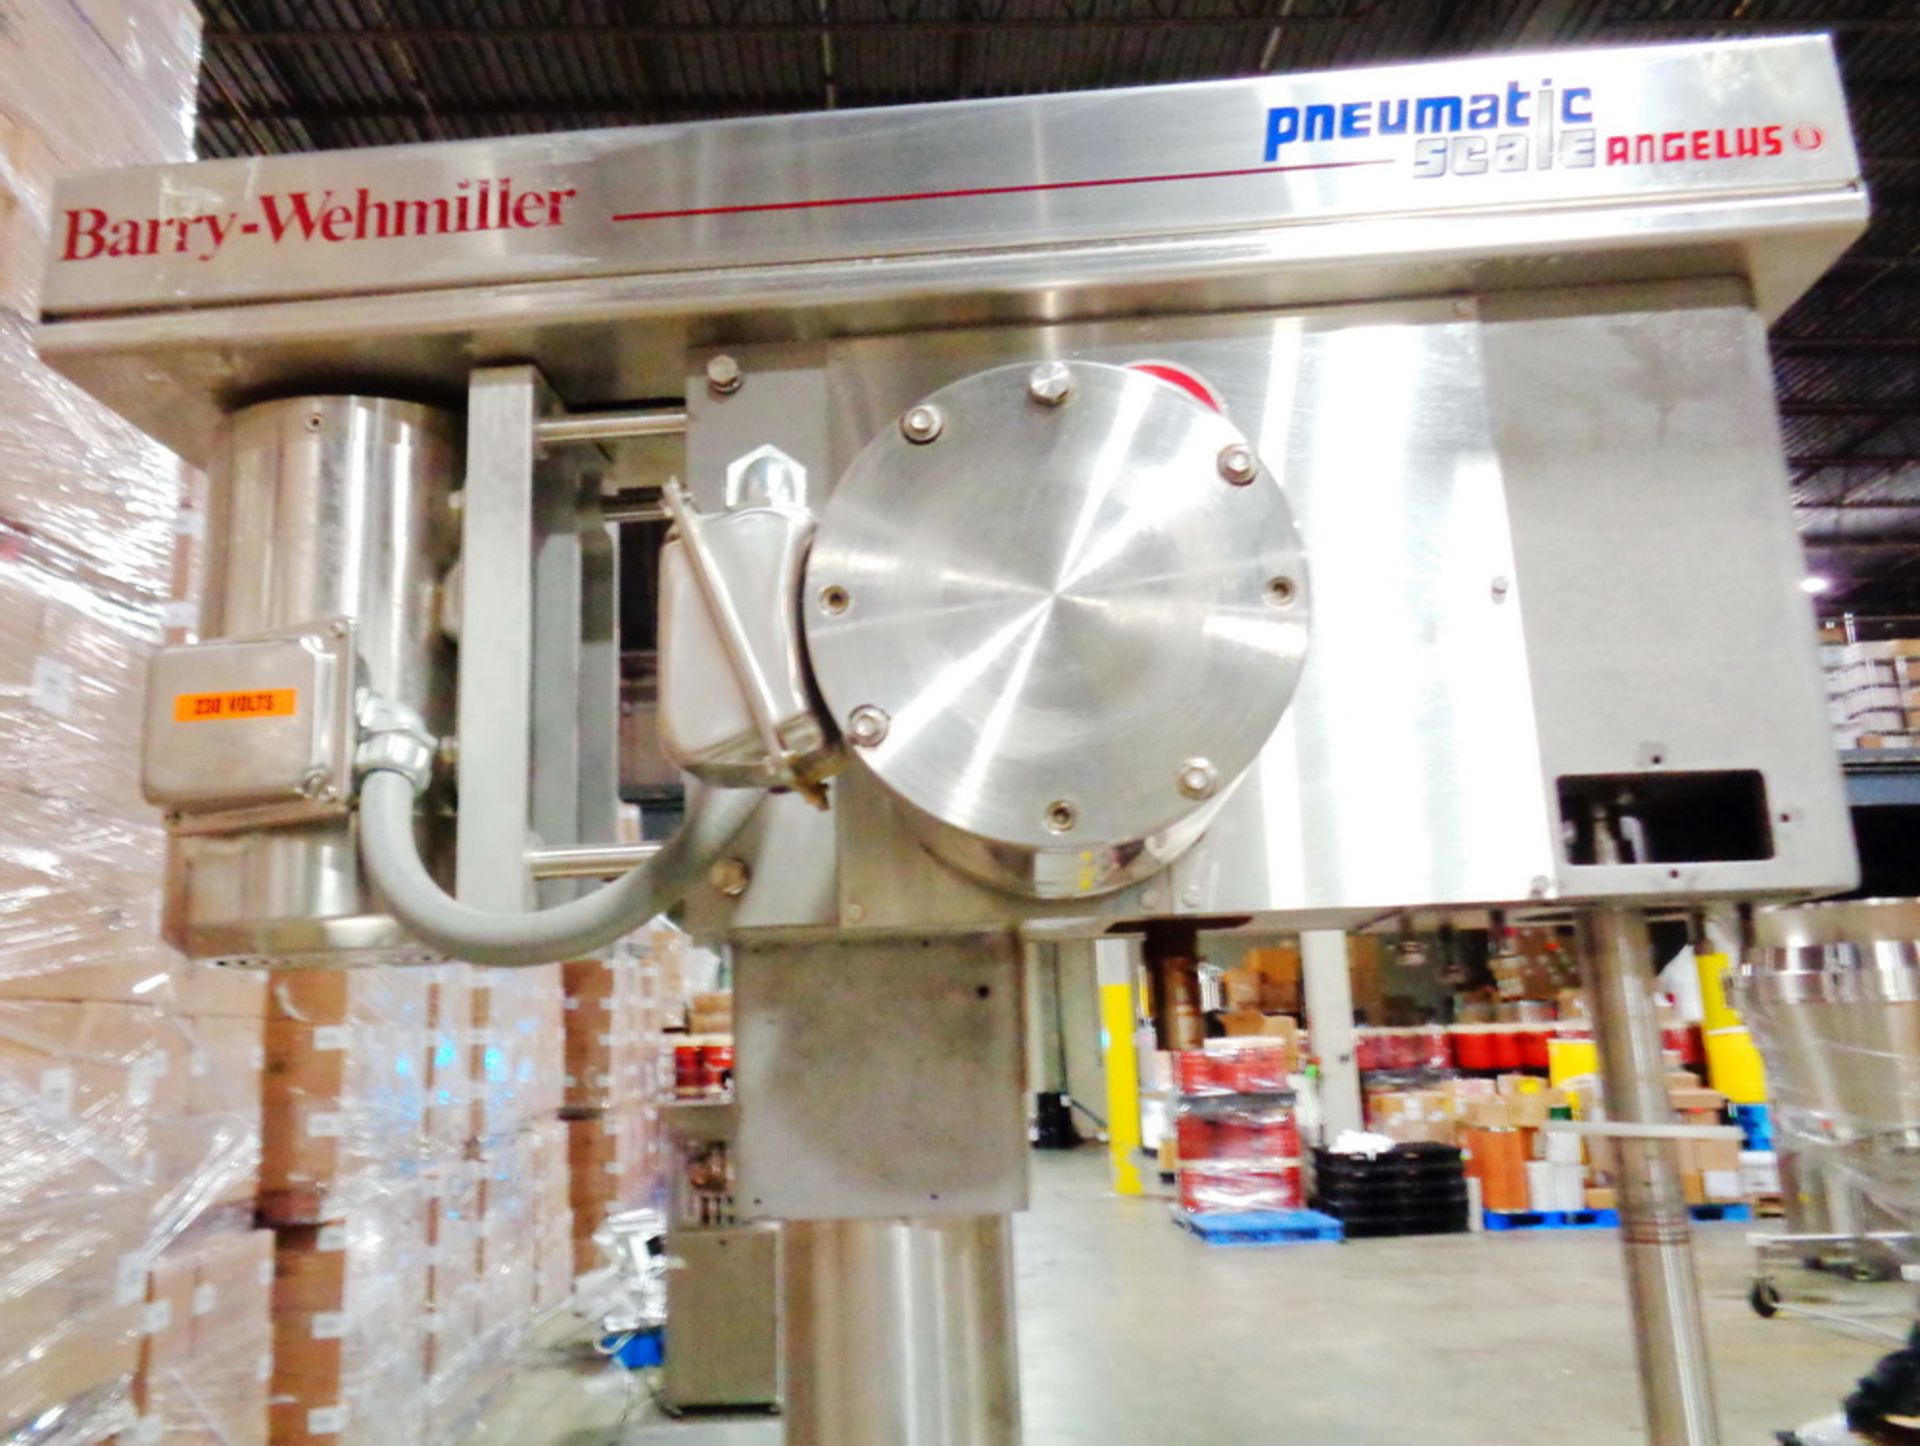 Barry Wehmiller/Pneumatic Scale Angelus/Mateer Single Head Auto SS Powder Auger Filler - Image 3 of 14